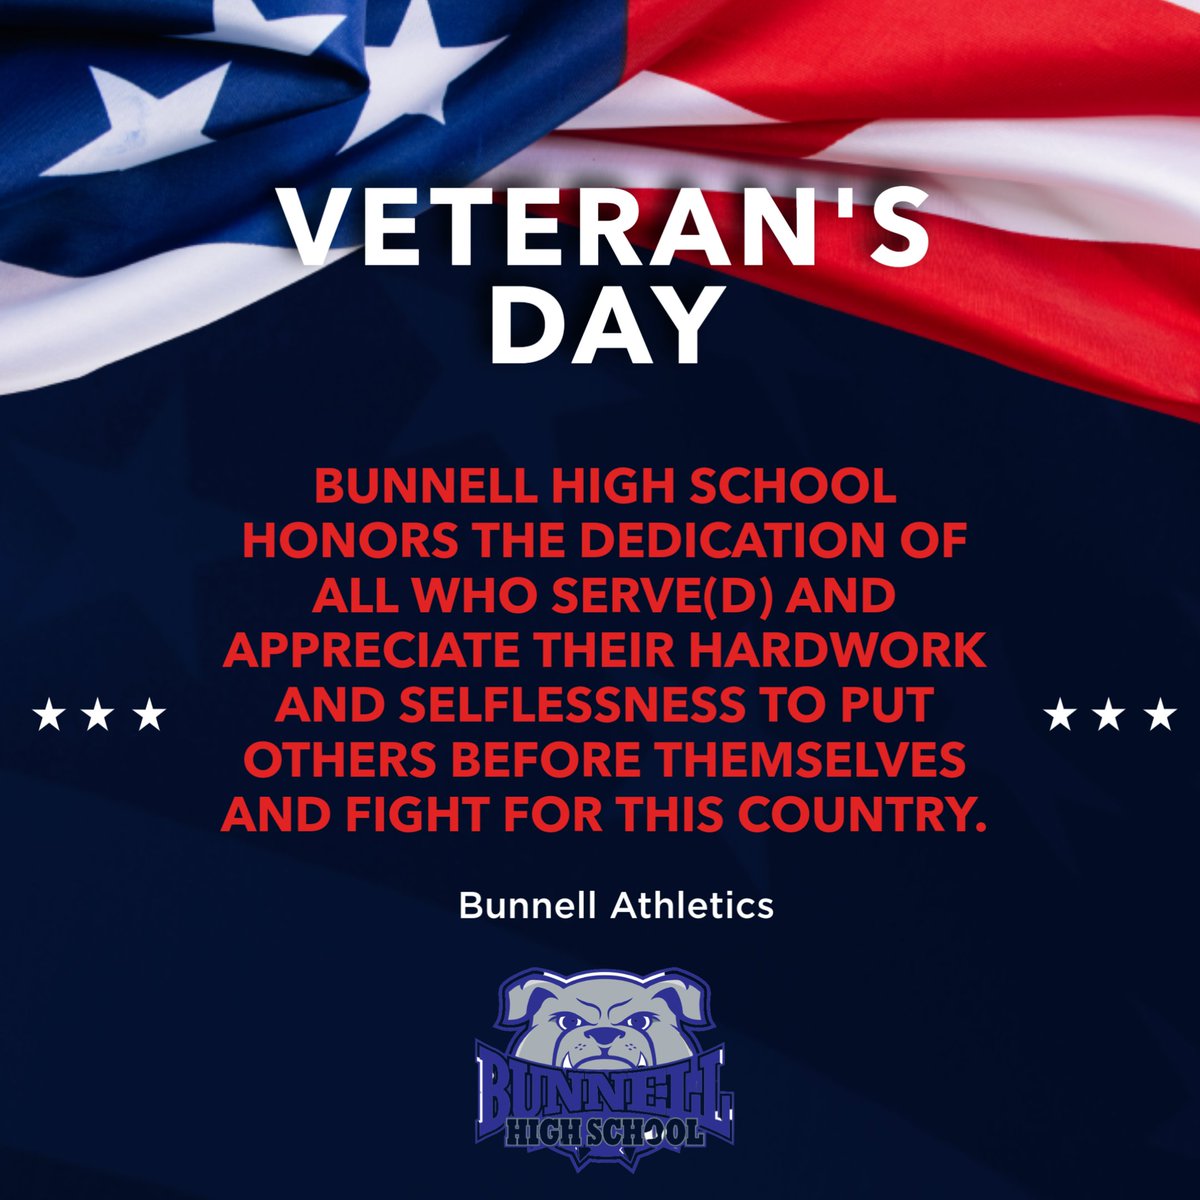 Bunnell High School Recognizes the dedication of those who have served and appreciate their hard work. #BunnellBulldogs #BunnellAthletics #VeteransDay